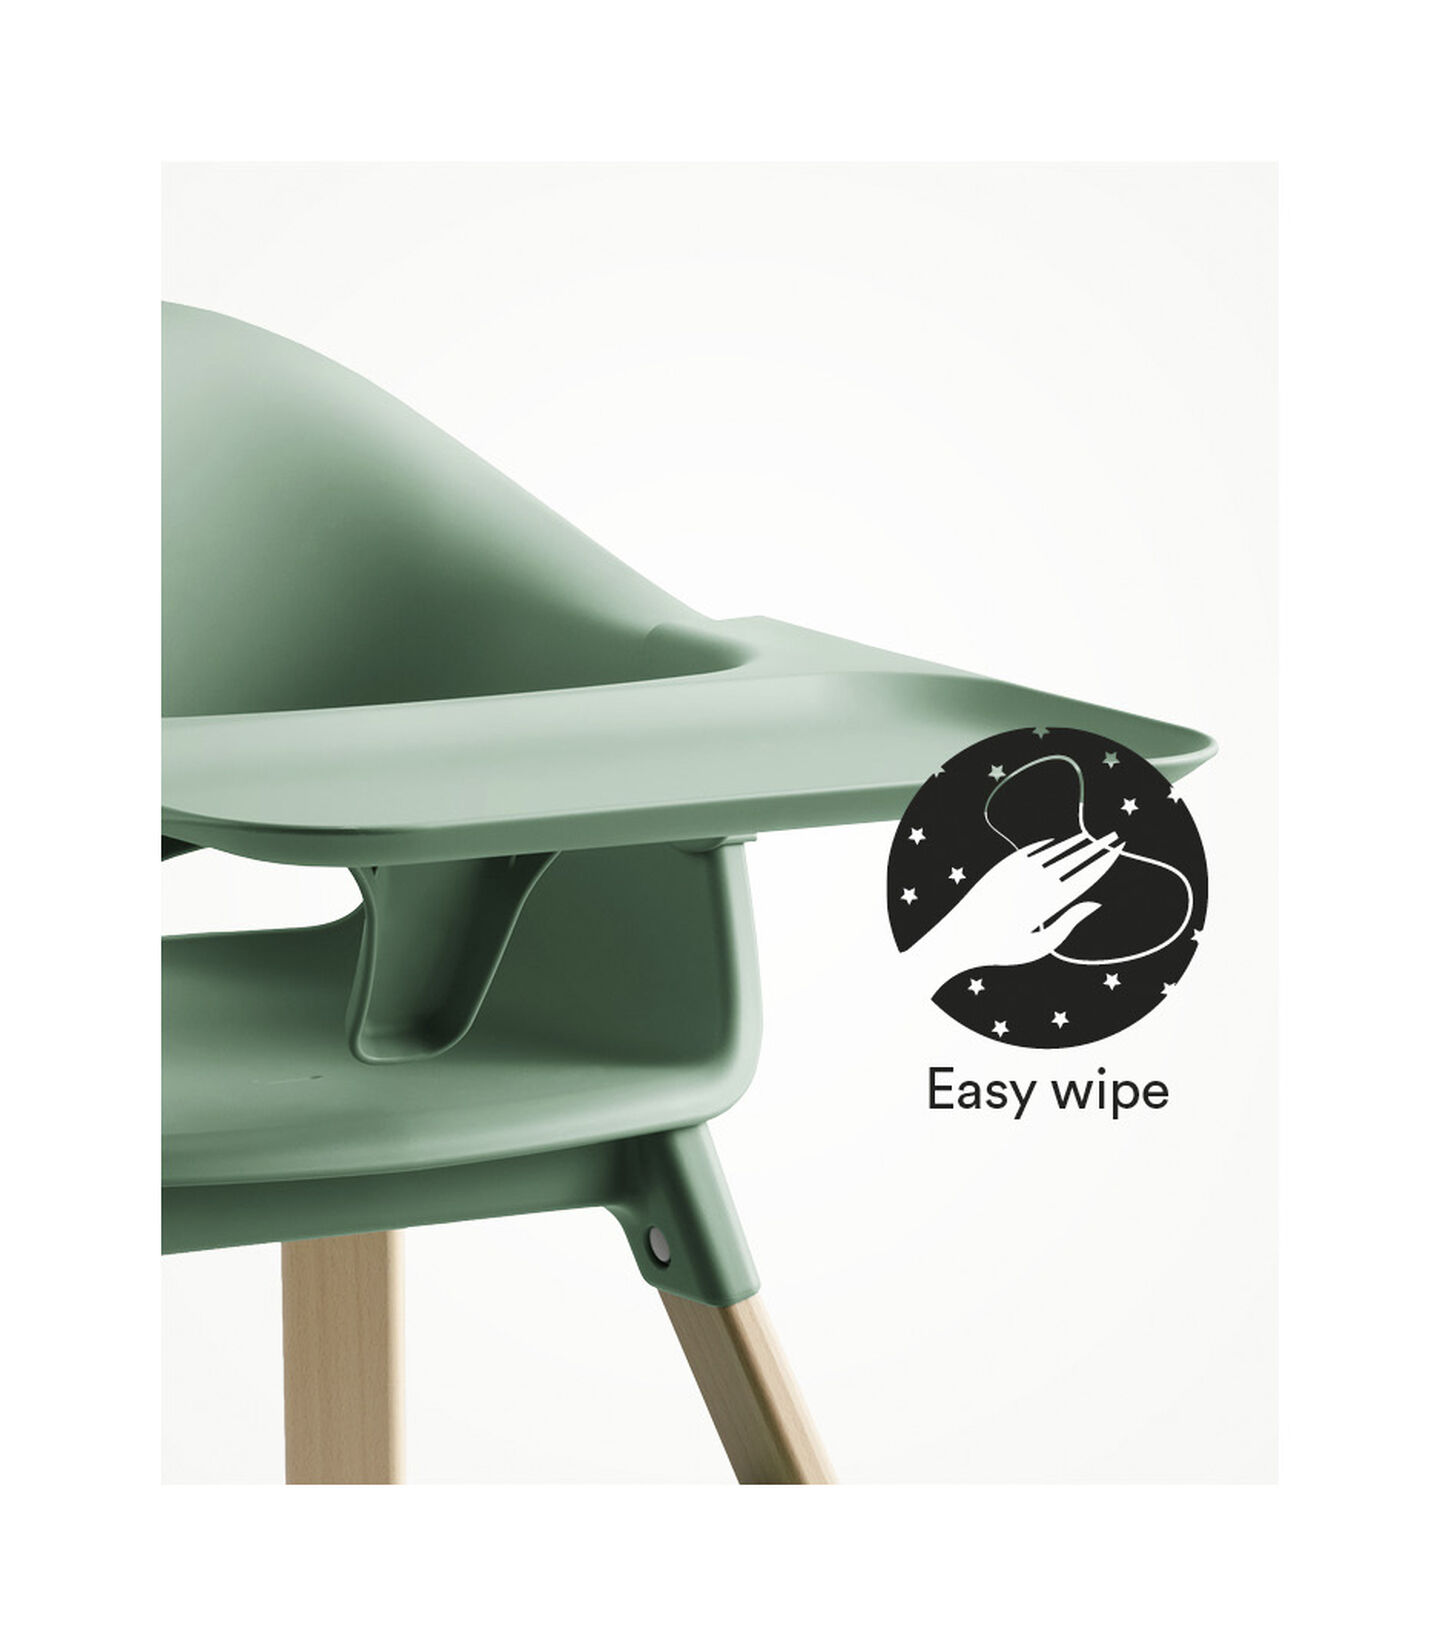 Stokke® Clikk™ High Chair with Tray, in Natural and Clover Green. Easy Wipe. view 6